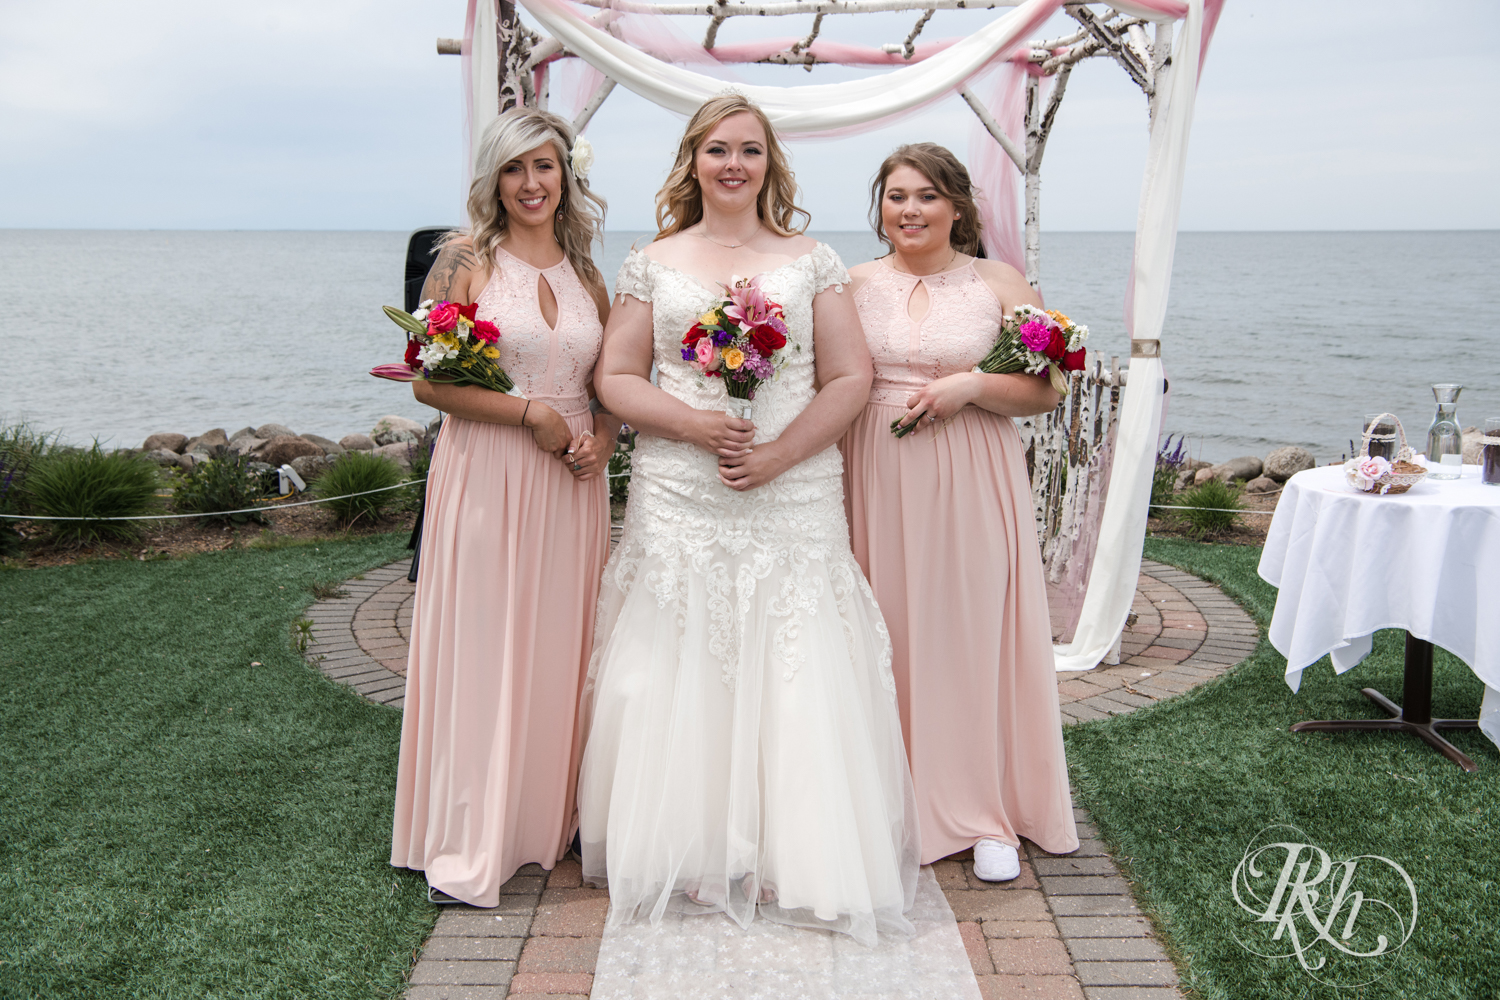 Wedding party smile in front of Lake Mille Lacs at Izatys Resort in Onamia, Minnesota.